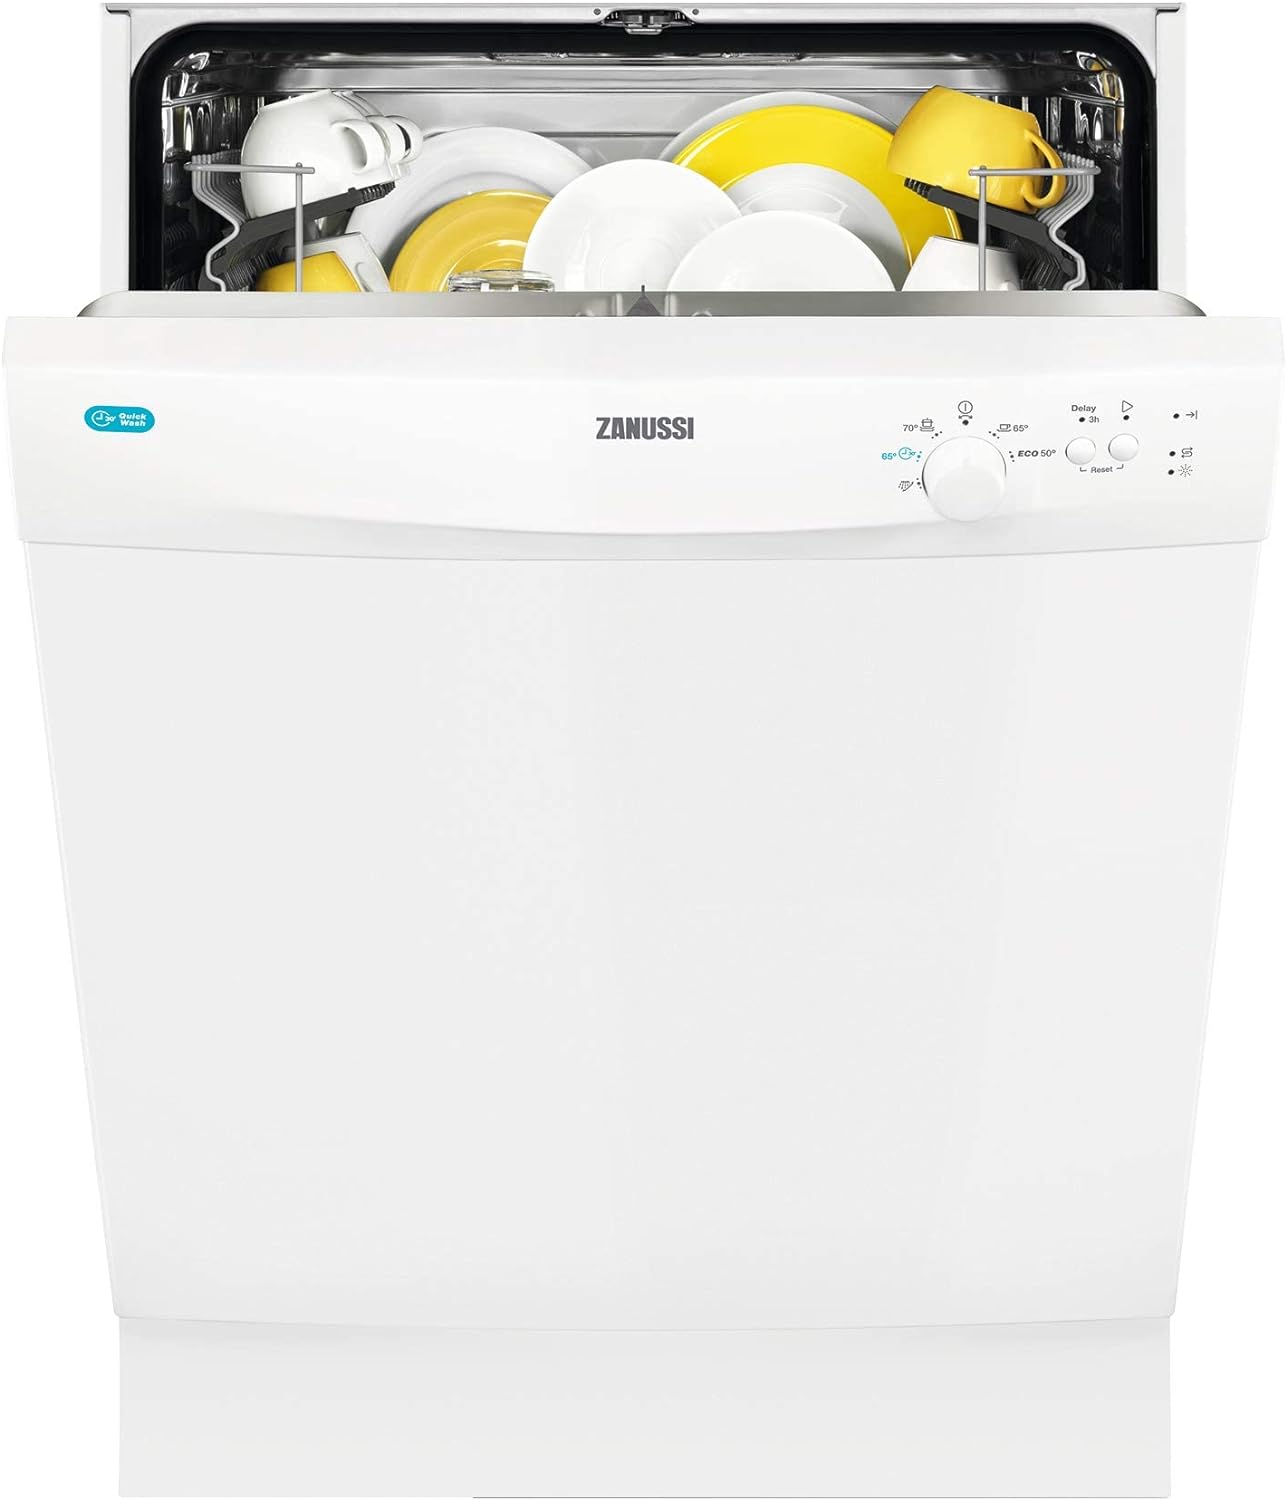 Zanussi Freestanding Dishwasher With AirDry Technology, 13 Place Settings, 5 Programmes, 60 CM, 49 dB, Auto Half Load, Intensive Programme For Stubborn Residue, White [Energy Class F] - Amazing Gadgets Outlet